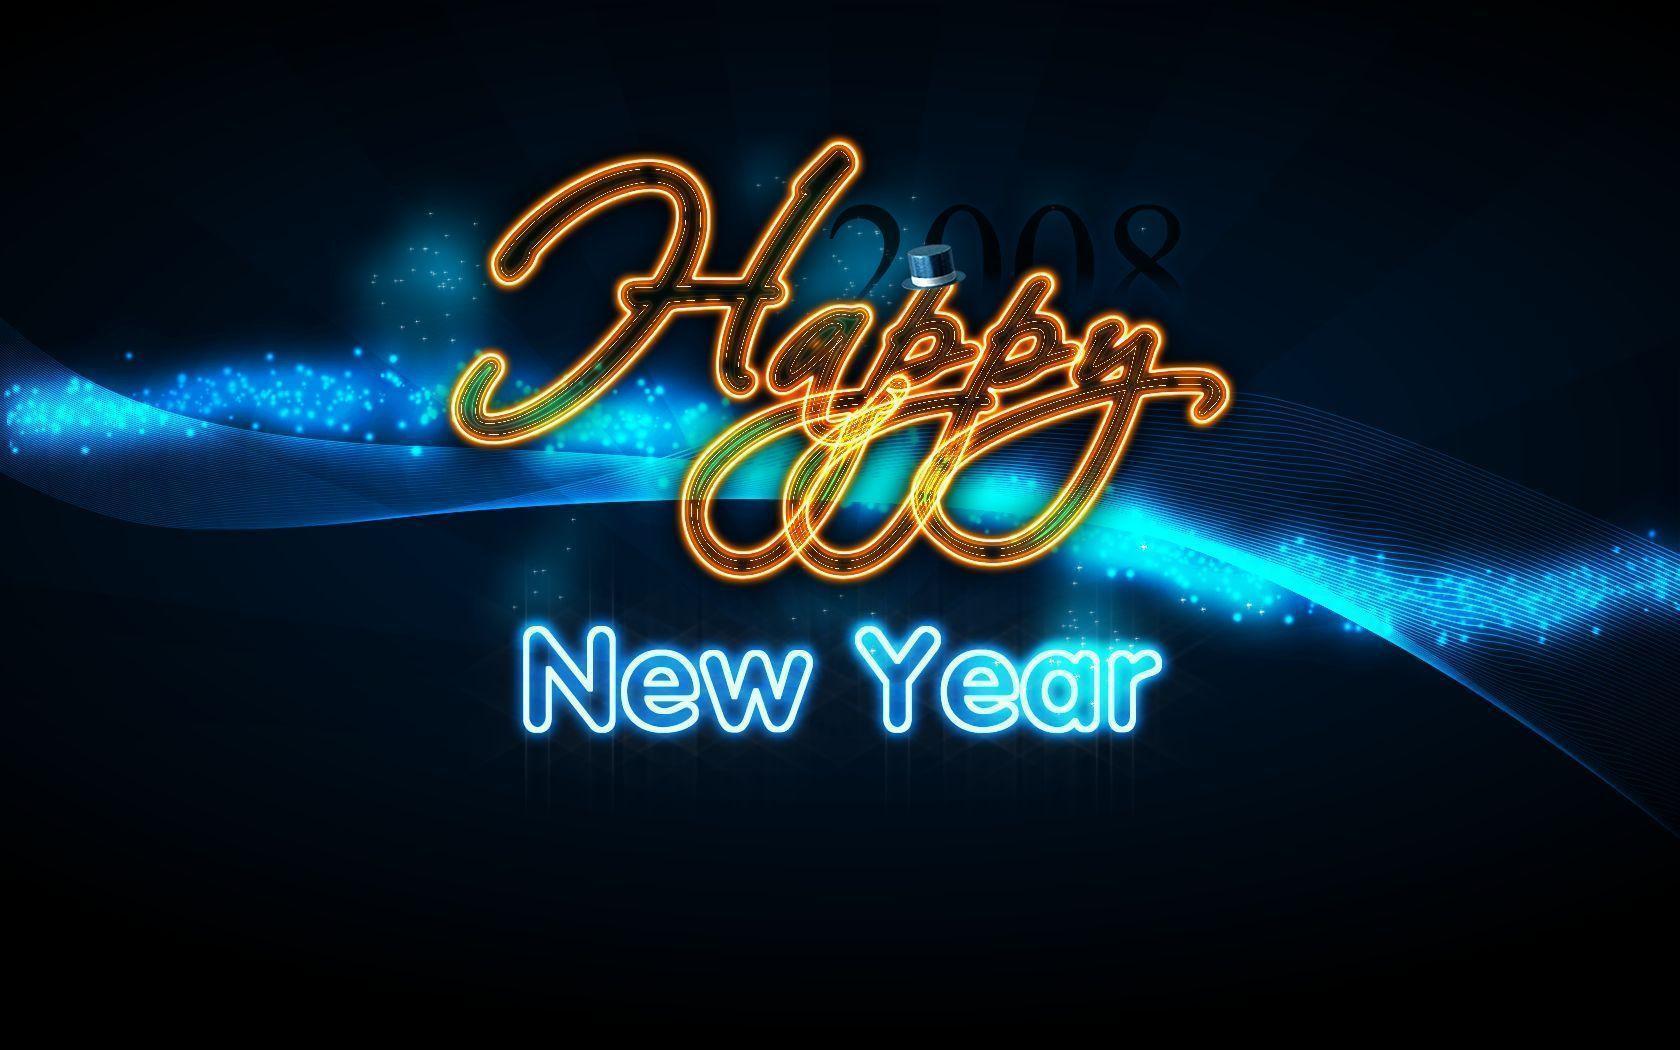 happy new year background free download. vergapipe